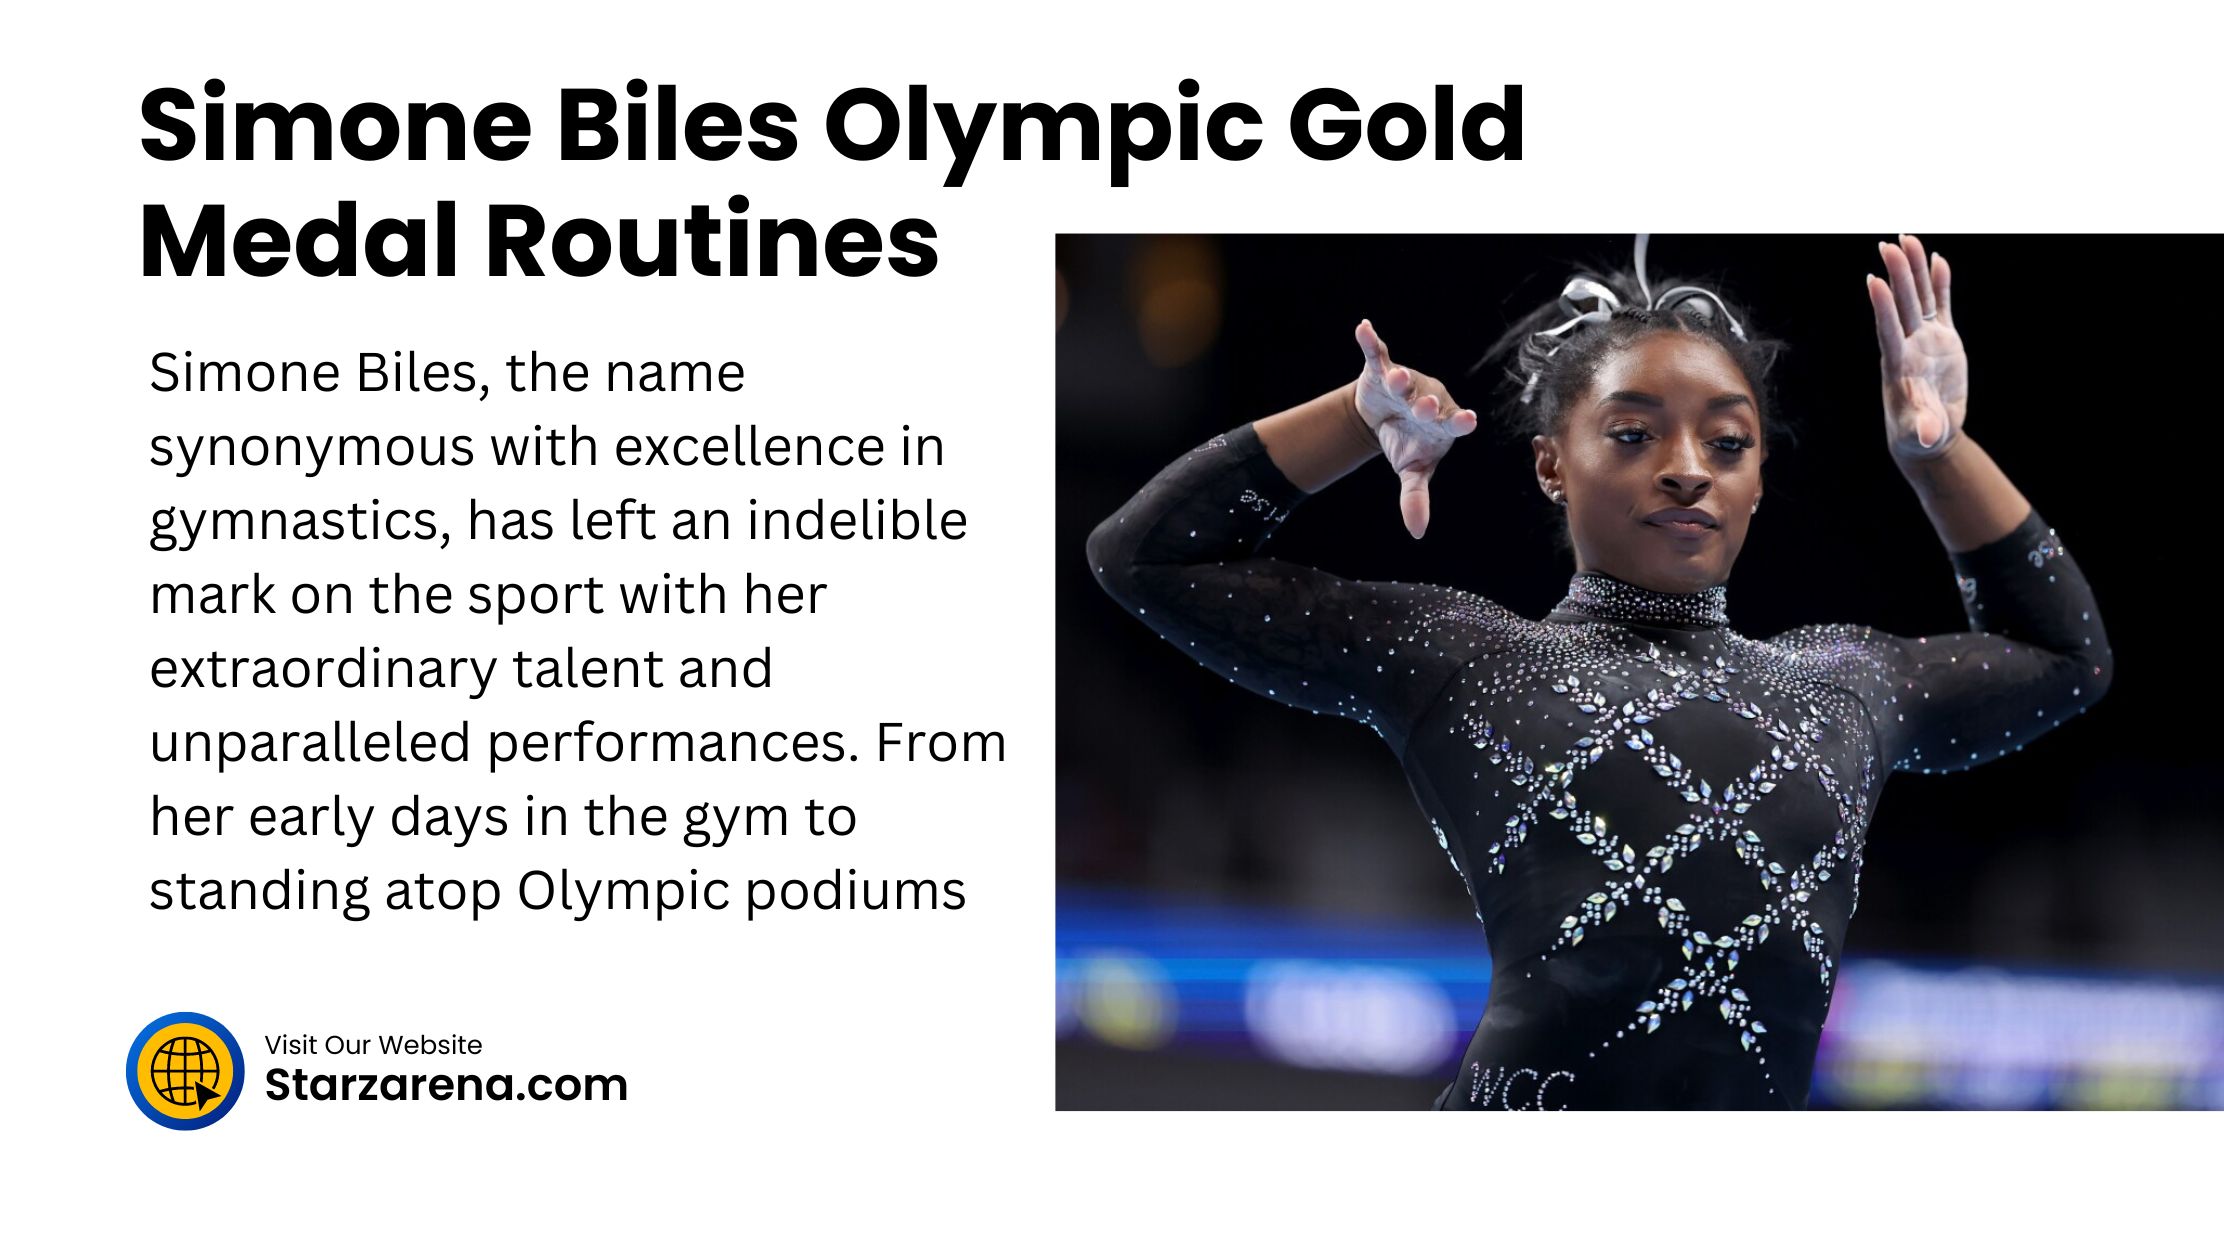 Simone Biles Olympic Gold Medal Routines